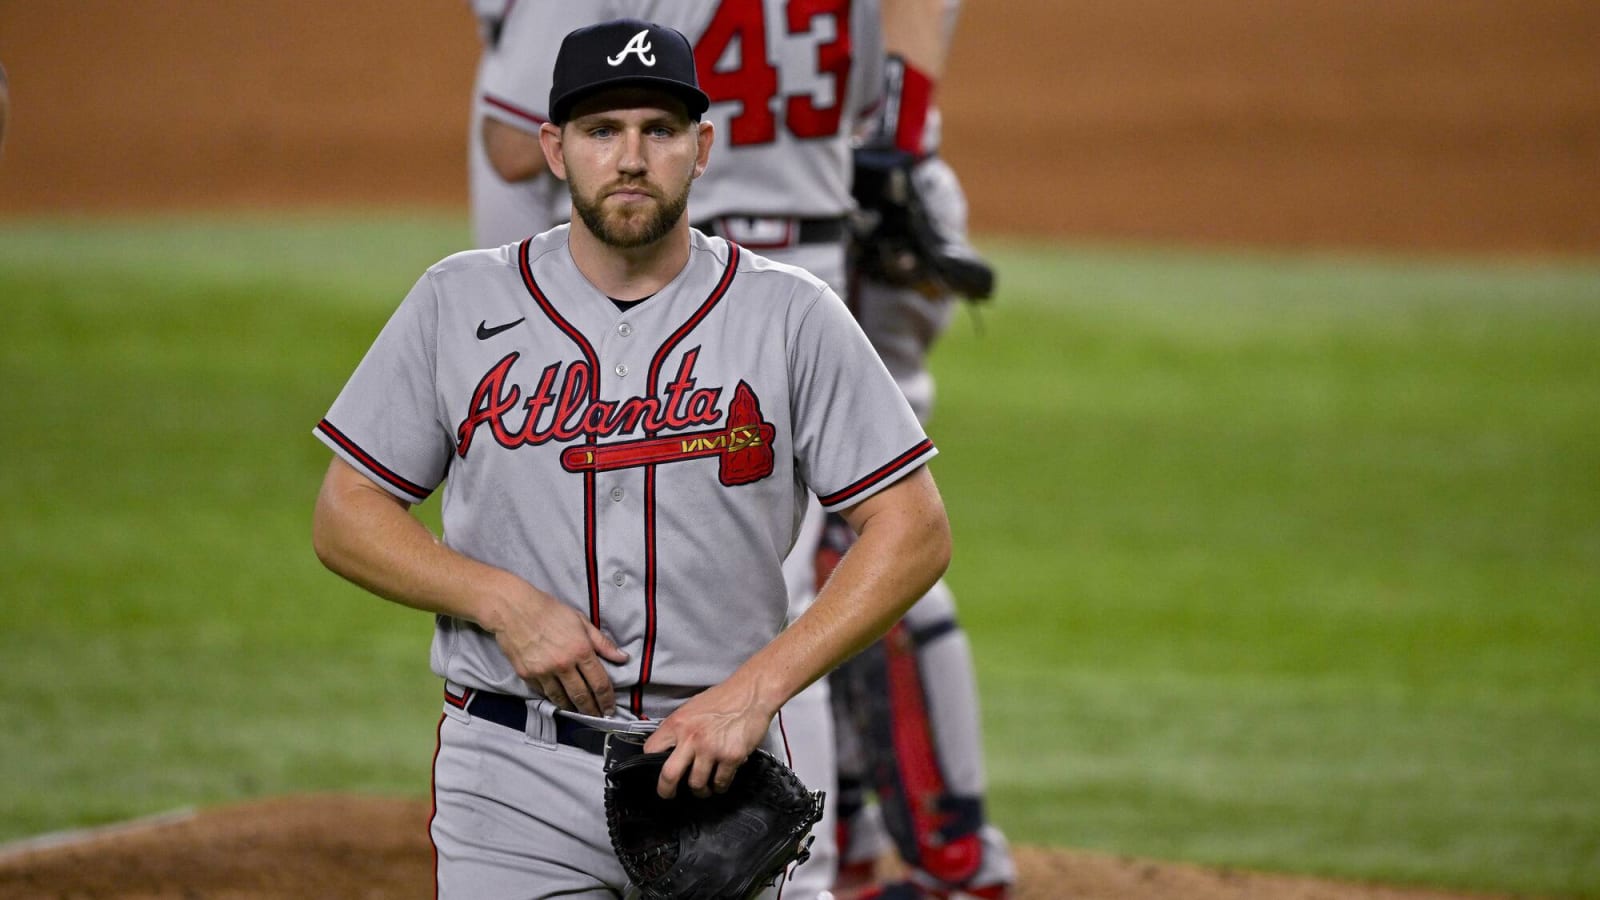 Another Braves reliever could return very soon